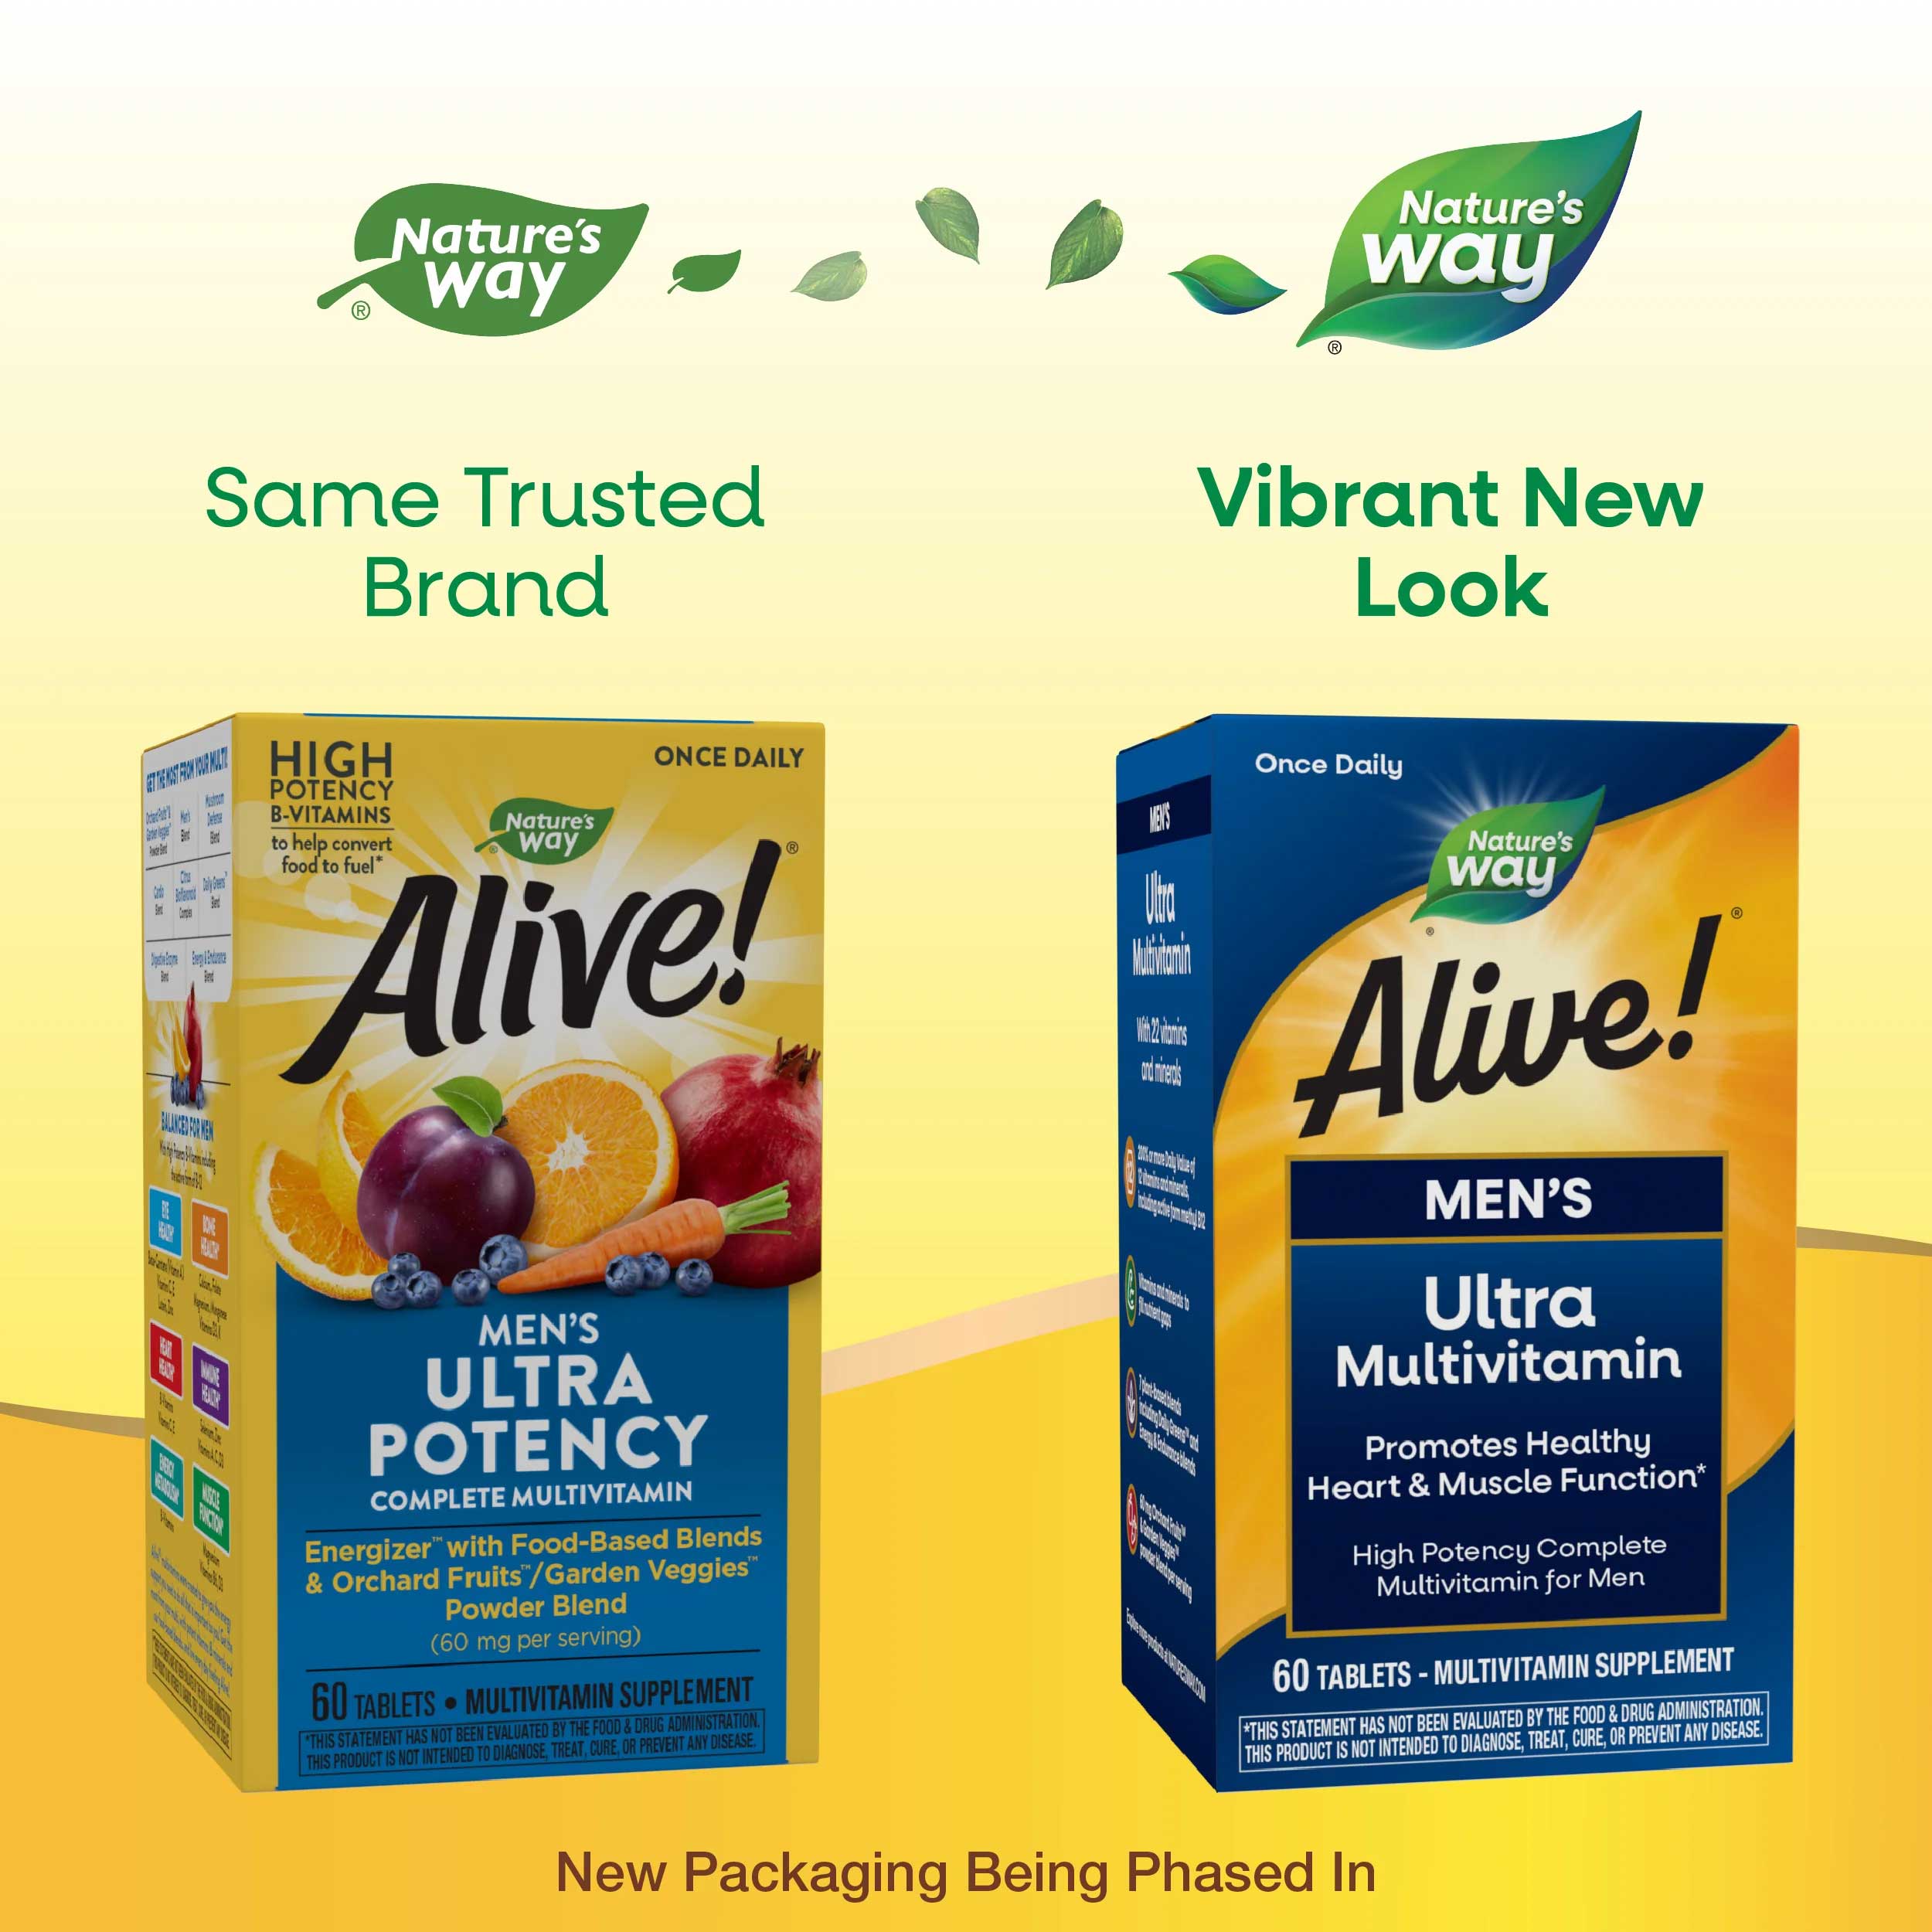 Nature's Way Alive! Men’s Ultra Multivitamin (Formerly Once Daily Men's Ultra Potency) New Look